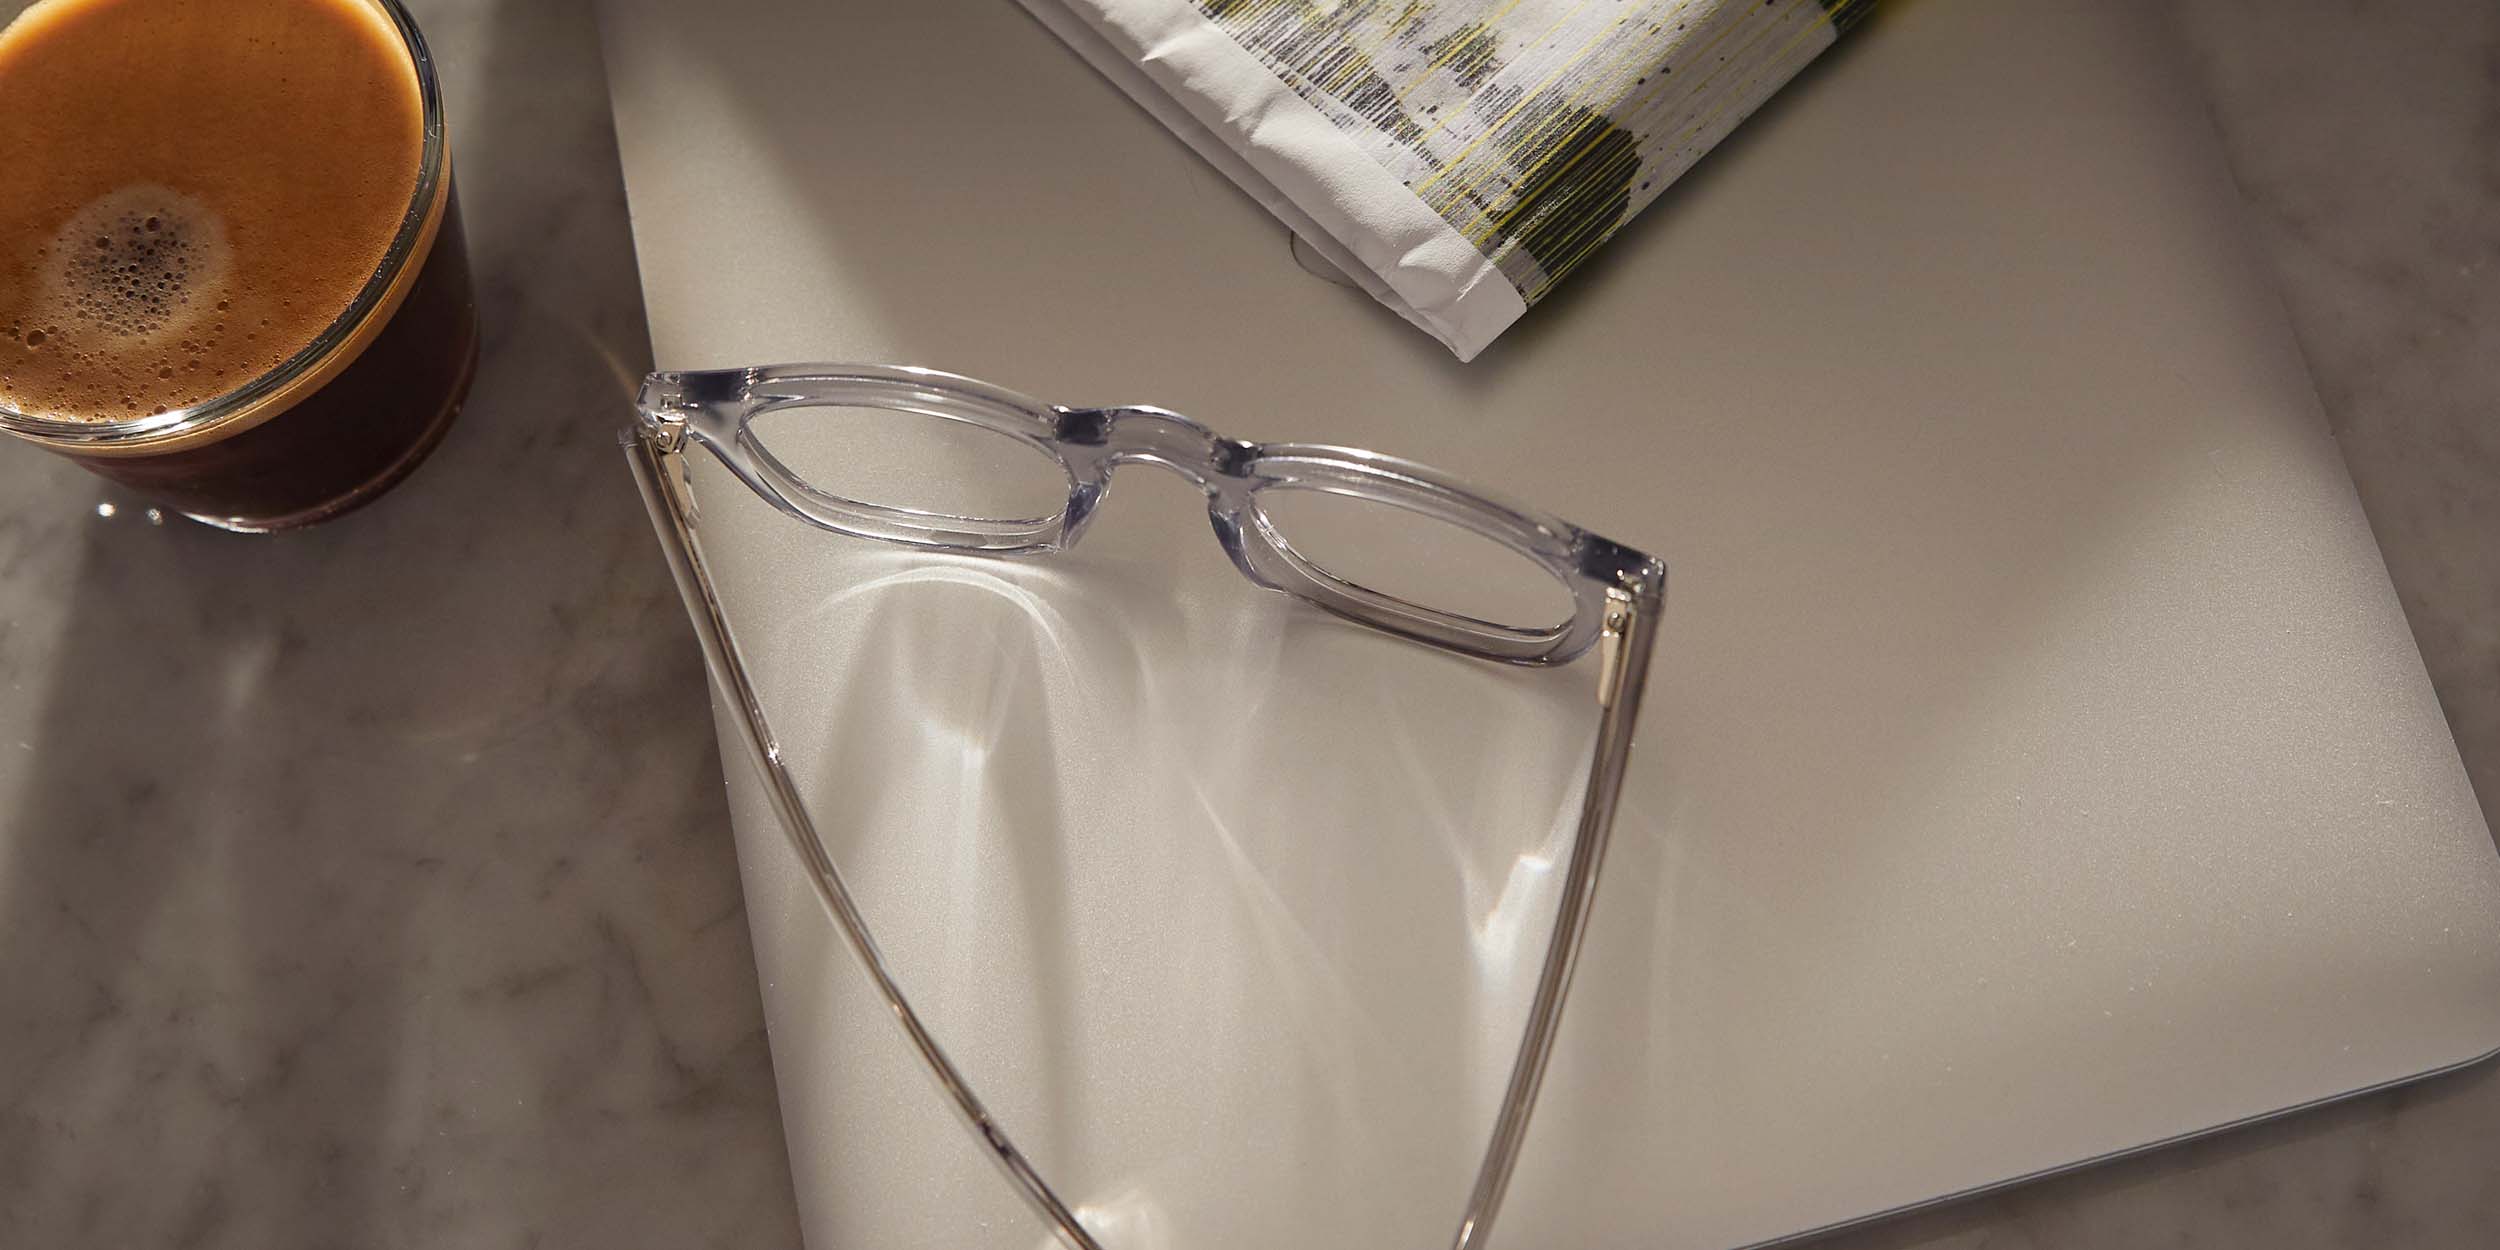 Photo Details of Thomas Dark Grey Reading Glasses in a room